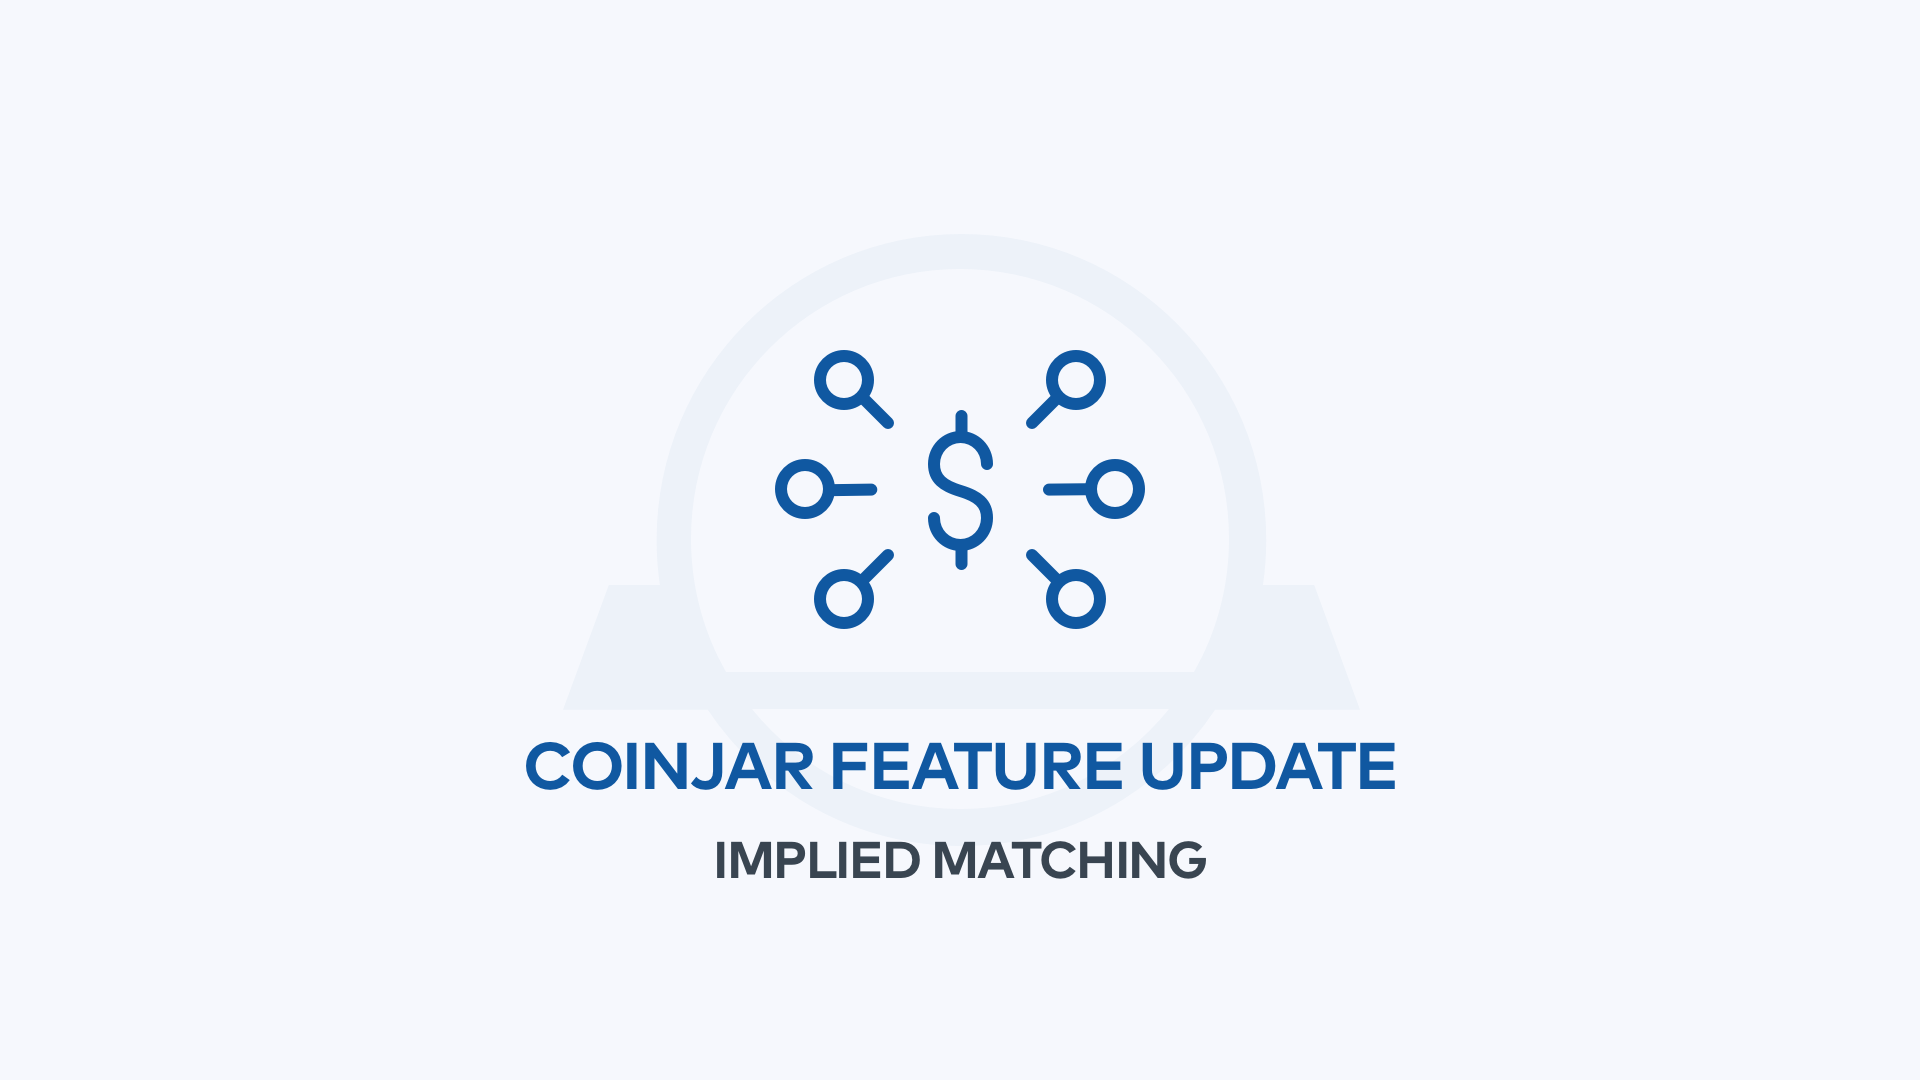 Learn how CoinJar is improving liquidity to bring you better prices